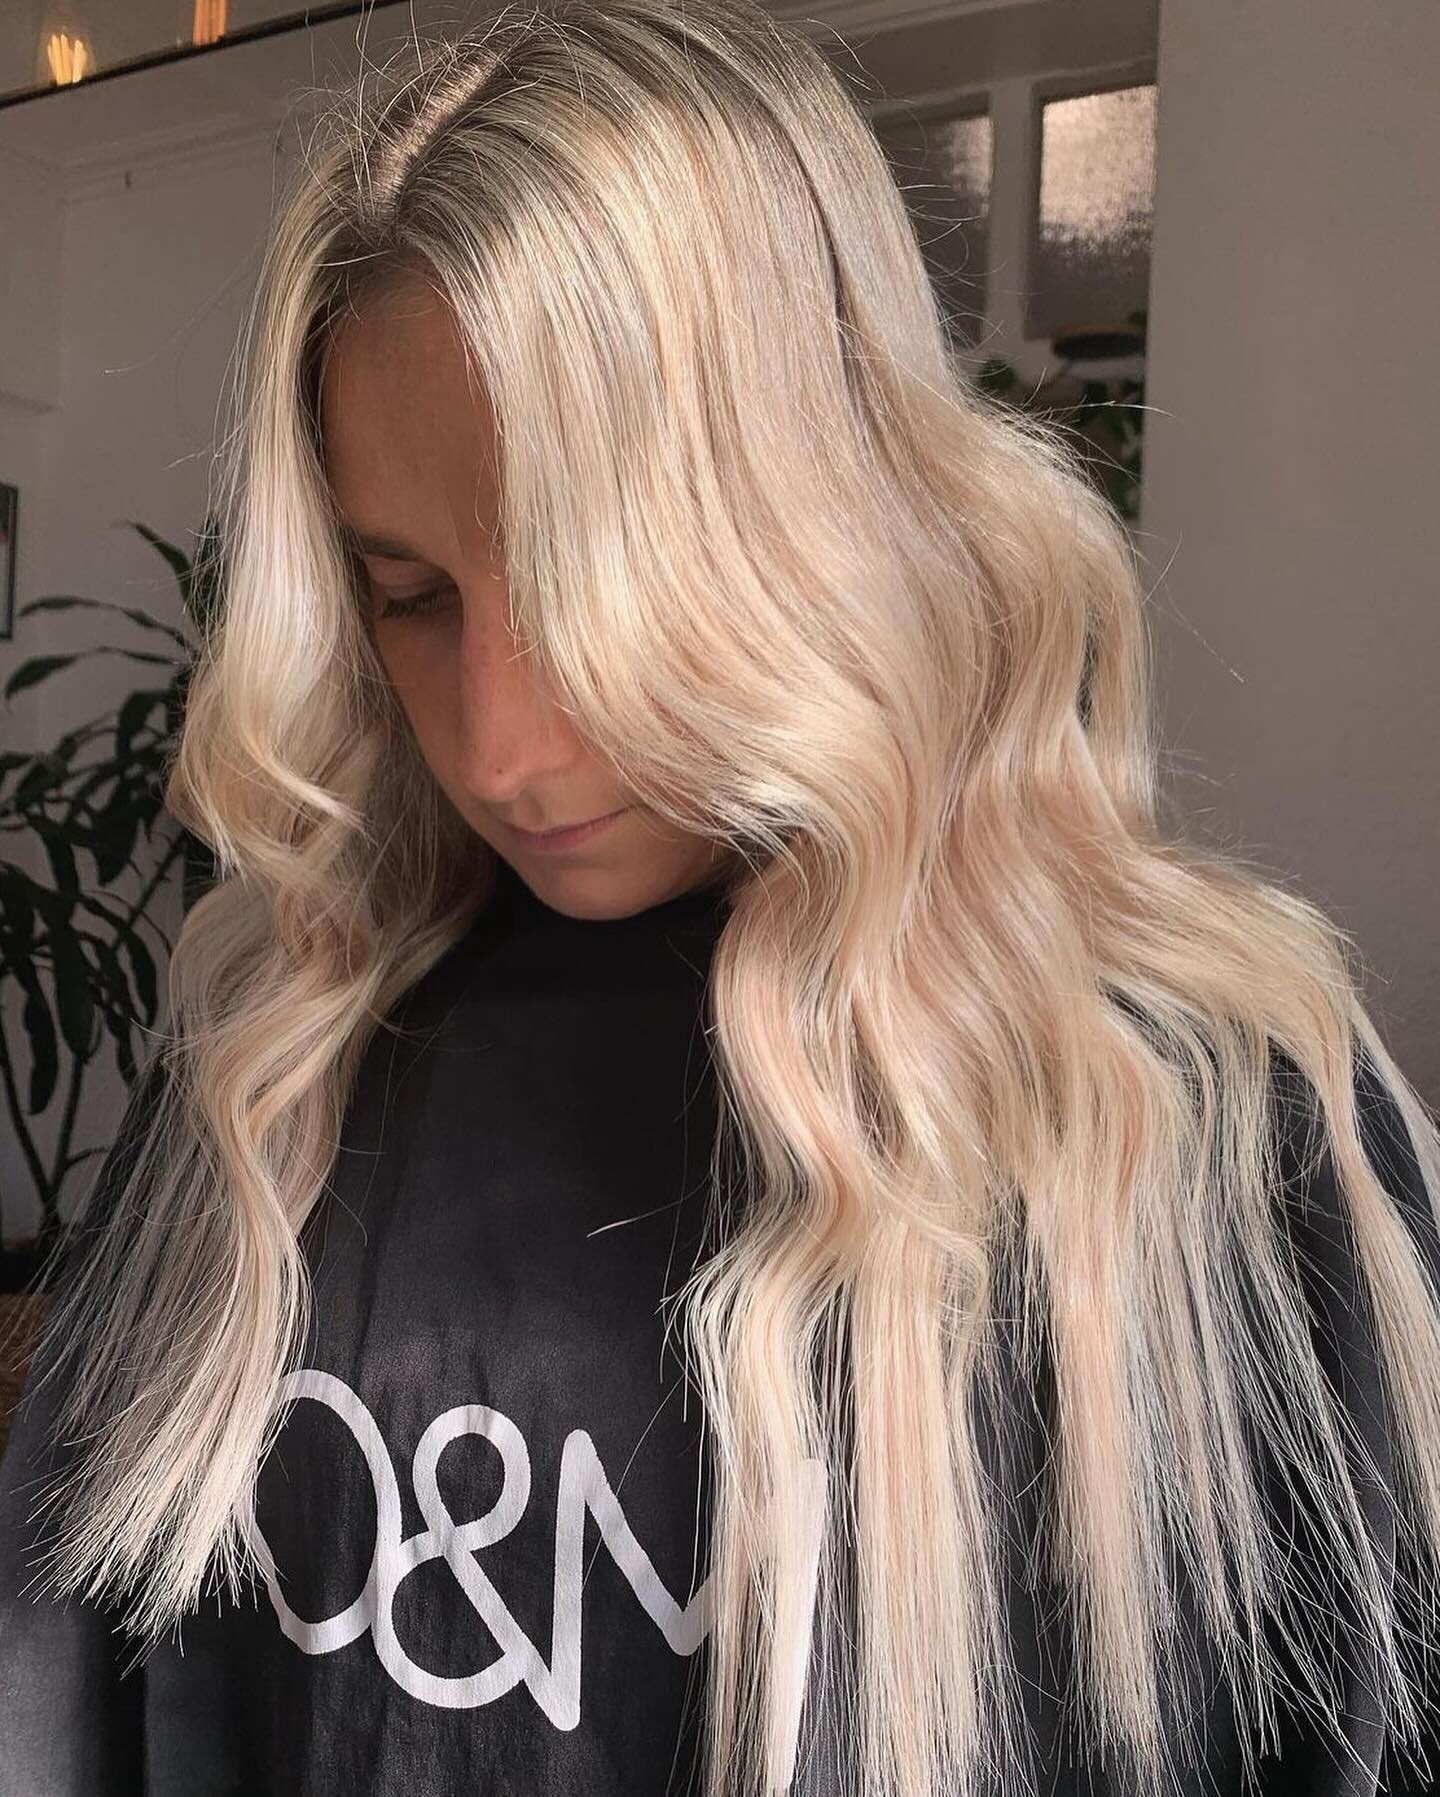 Yes yes and yes 🙌🏻🙌🏻🙌🏻 @aloura_jadshairdressers bringing us the ultimate blonde extension combo today using the colours 'Eve' and 'Koda' 🤍

With just under 100g of 16&quot; wefts Aloura has gone for a one row track to give a fullness to the ha